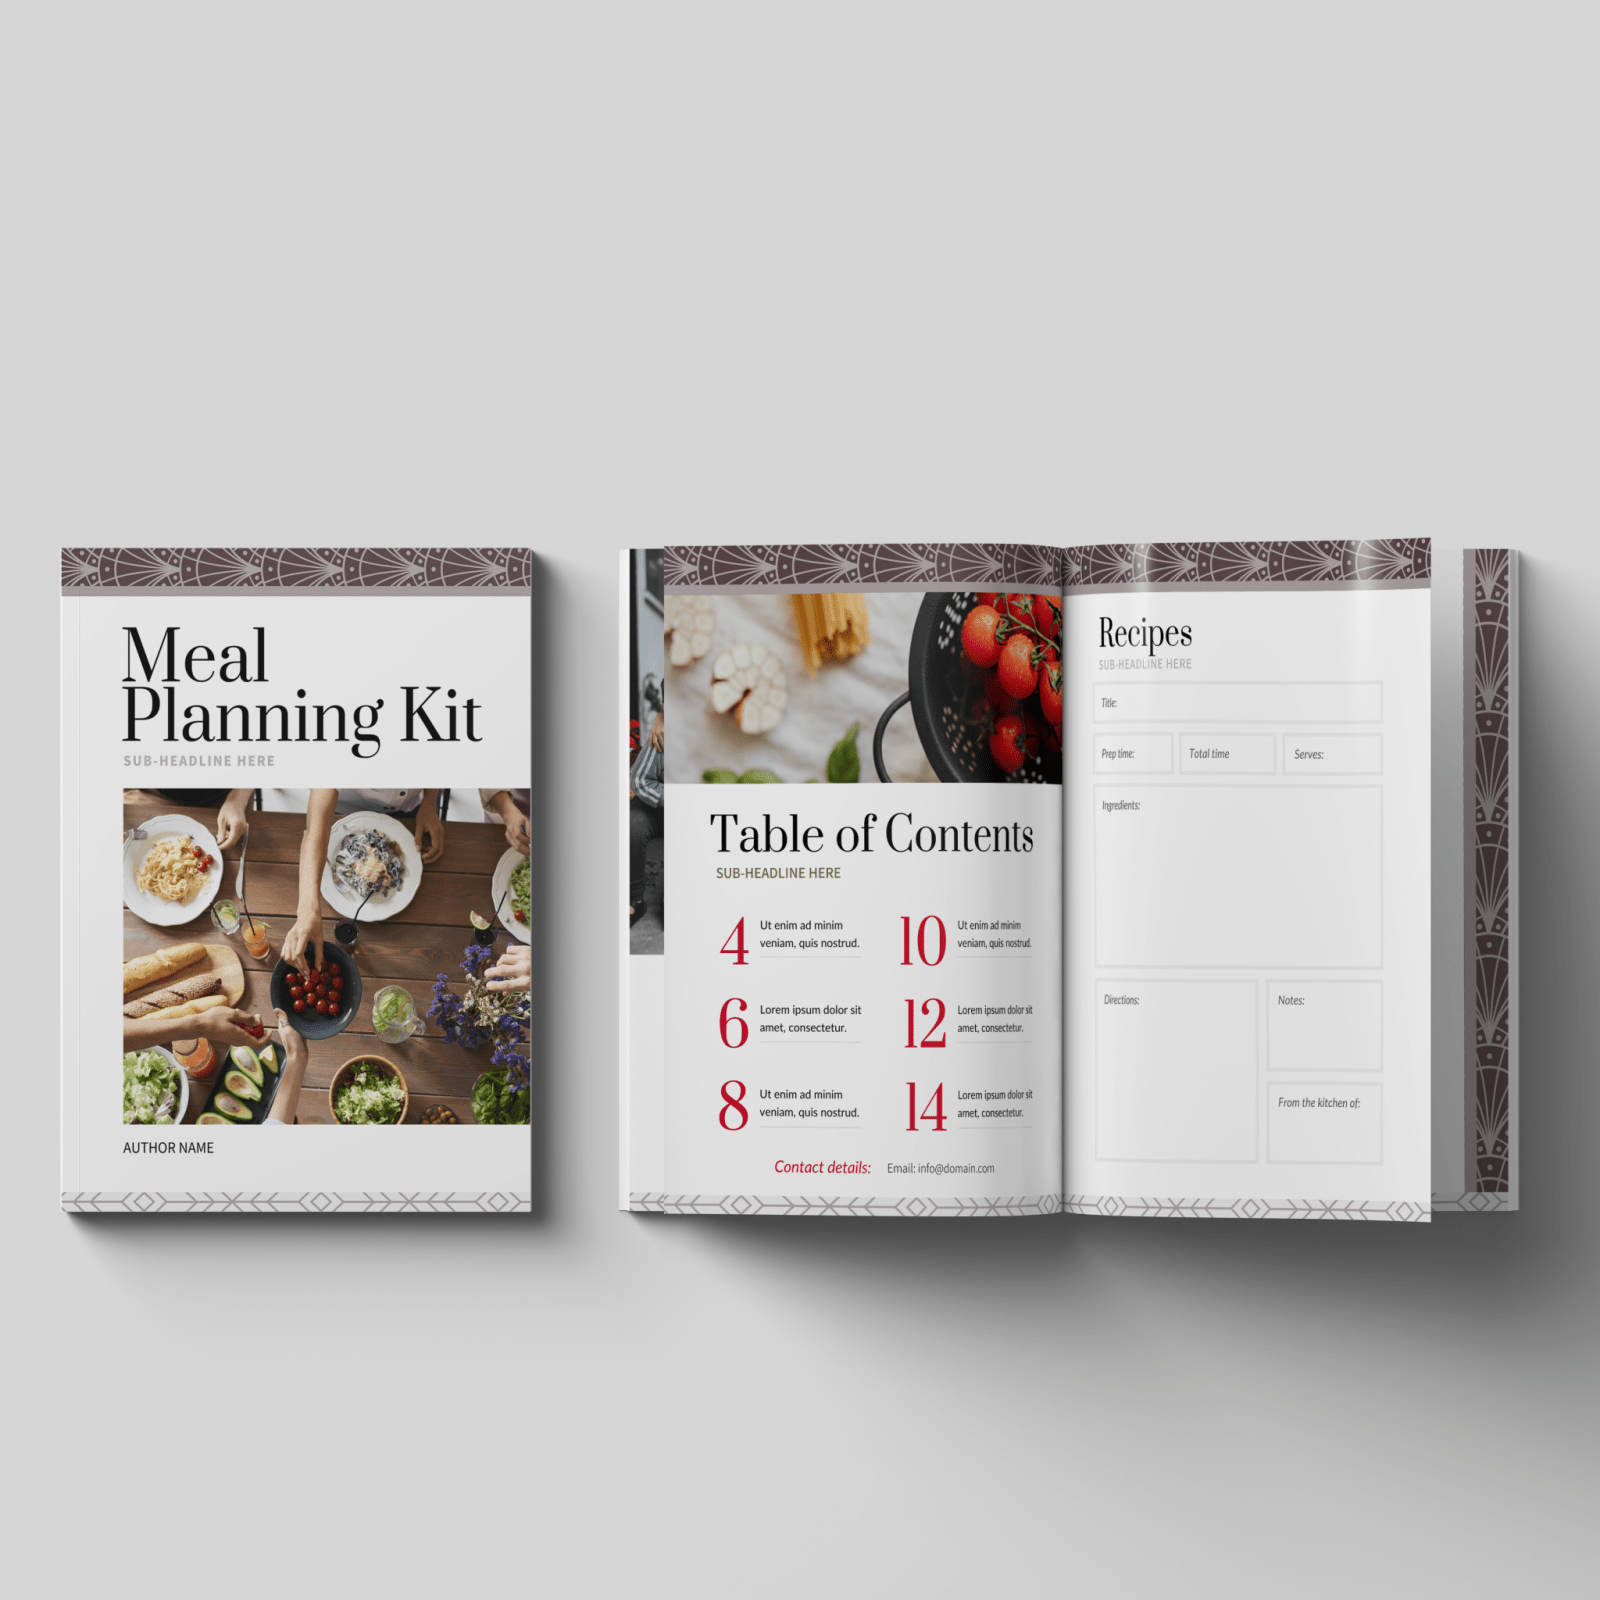 MDY Meal Planning Kit 1